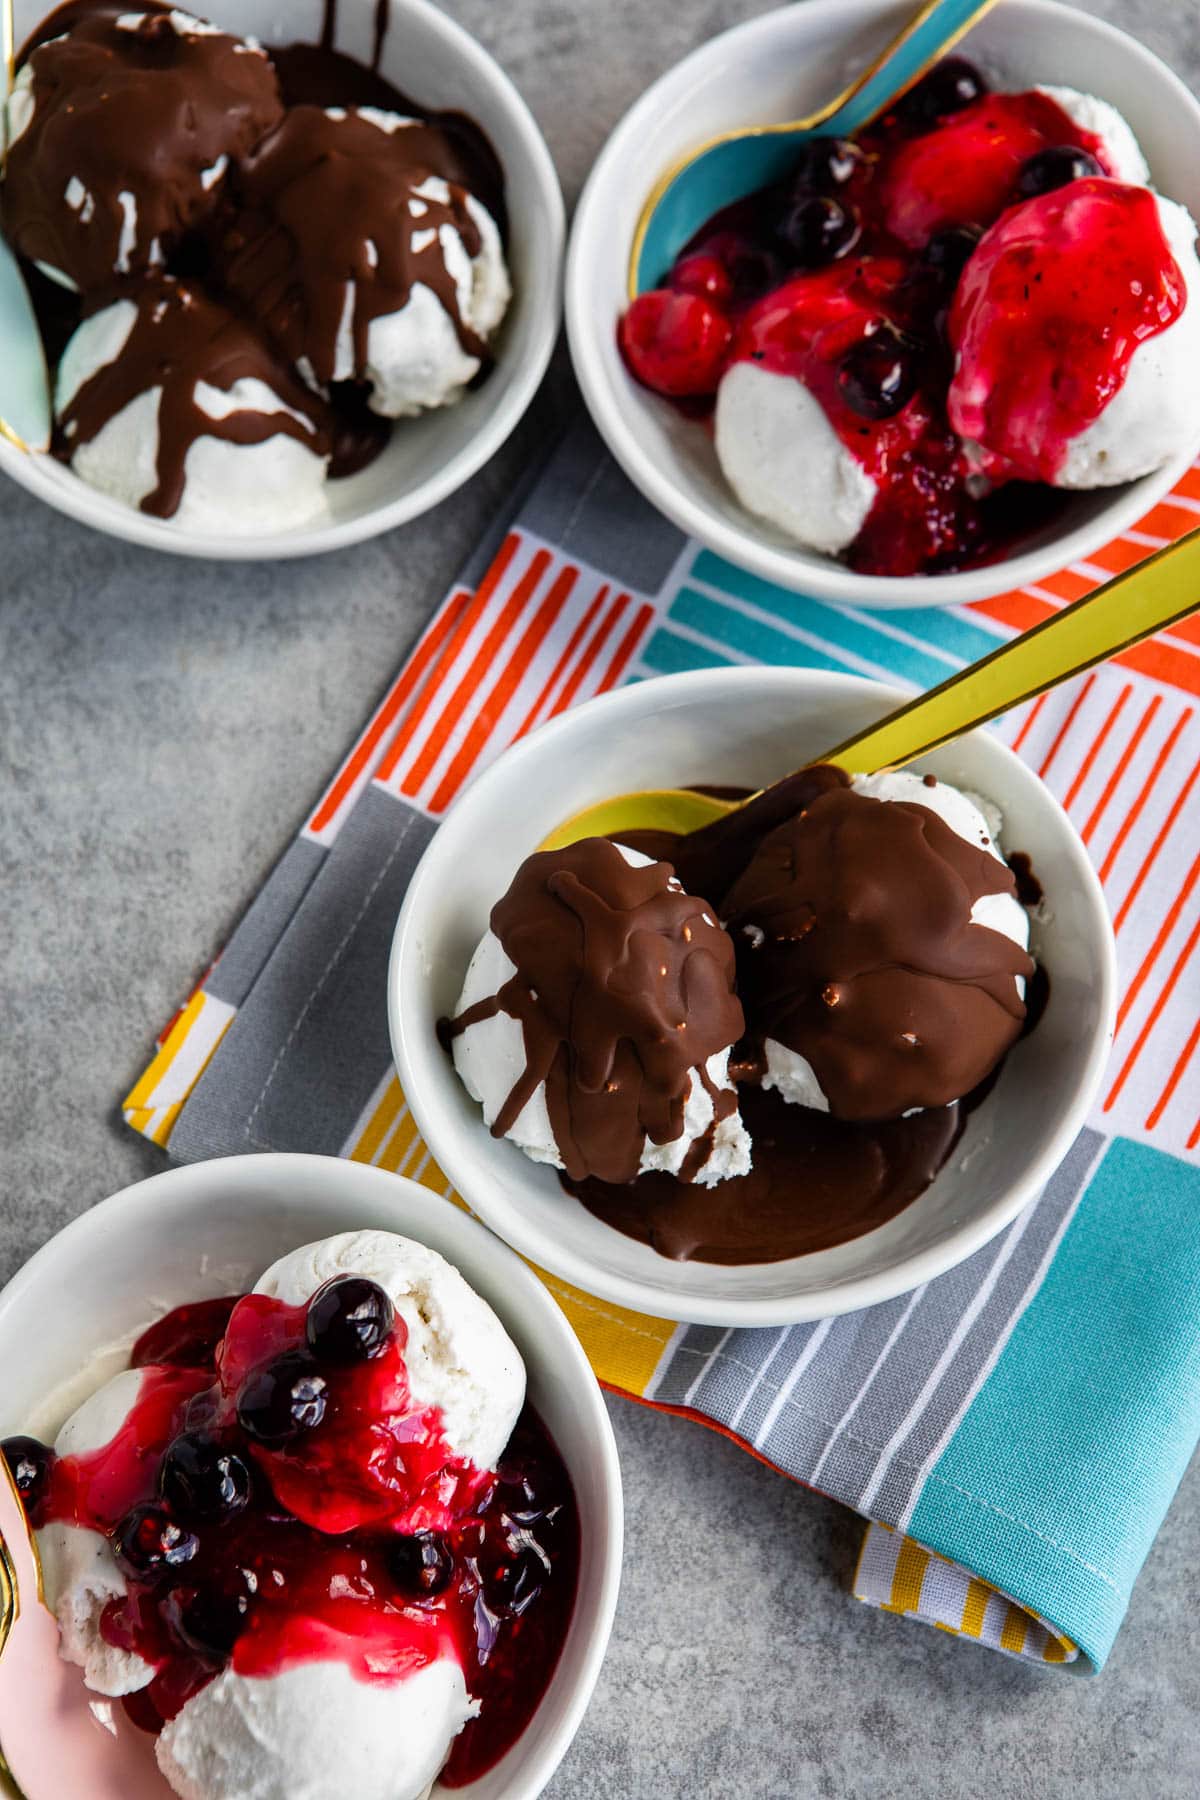 4 bowls of plant-based ice cream, some topped with chocolate crackle and some topped with fruit compote.